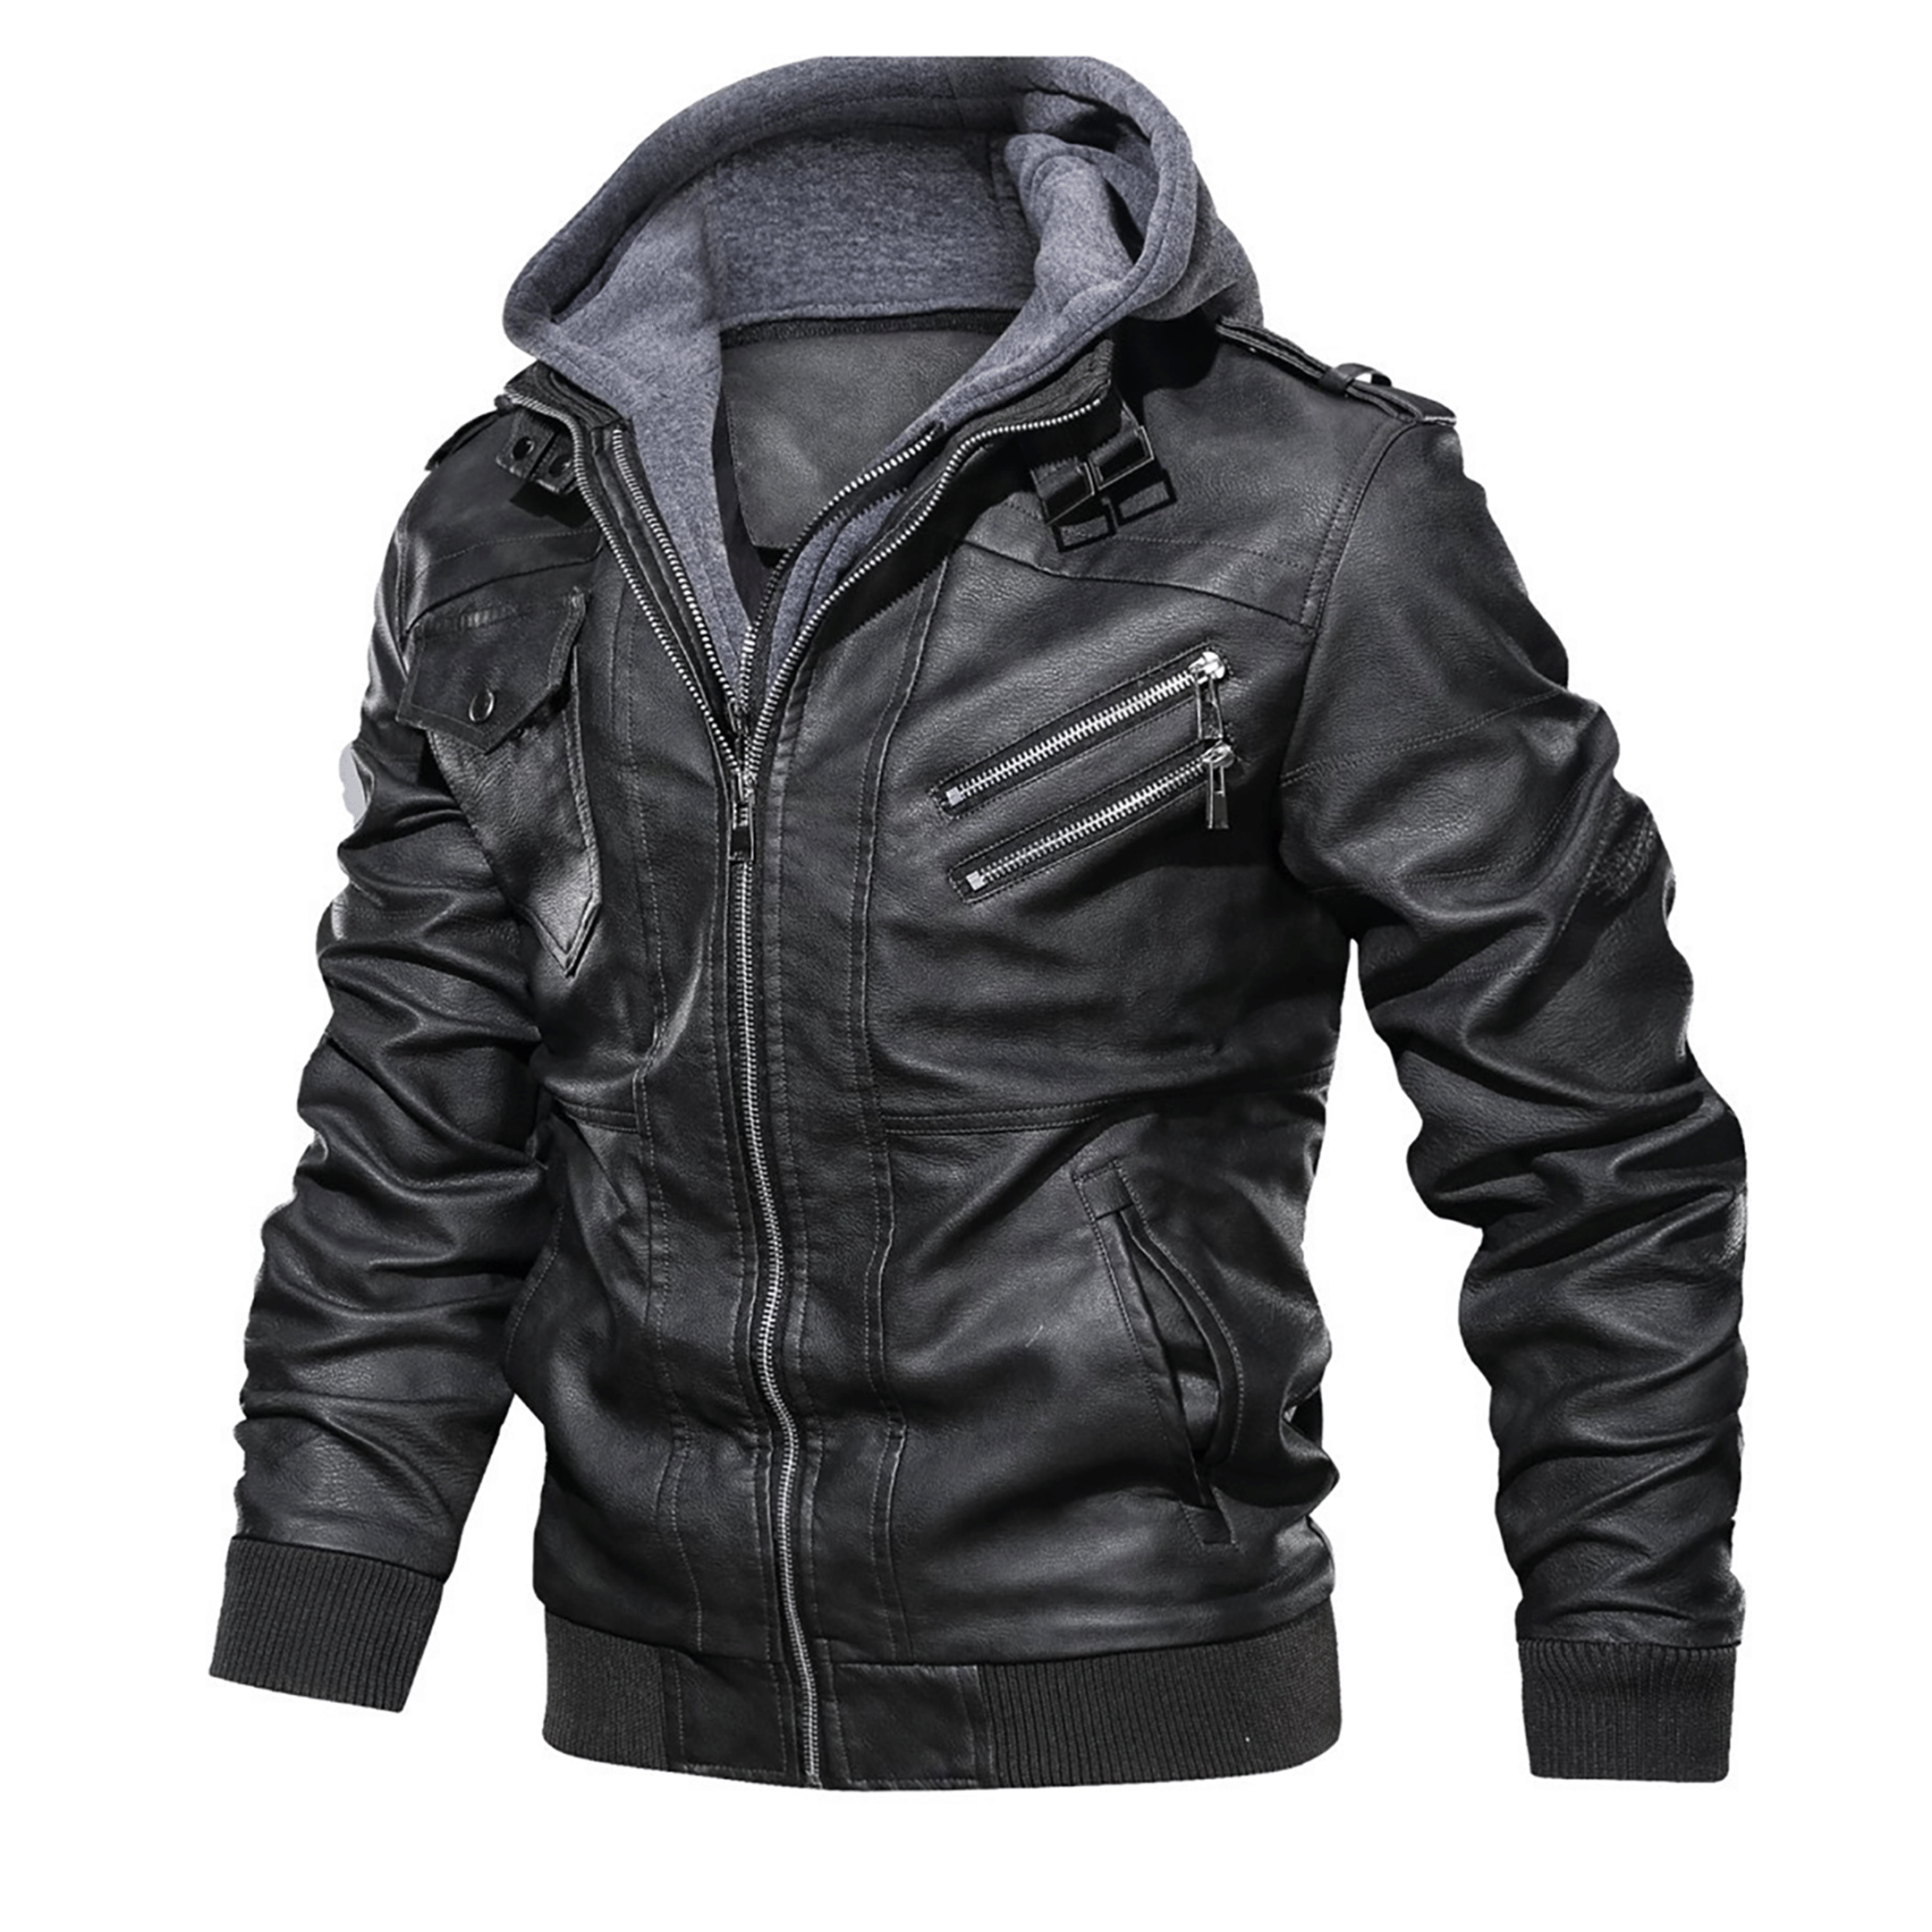 Top leather jackets and latest products 171